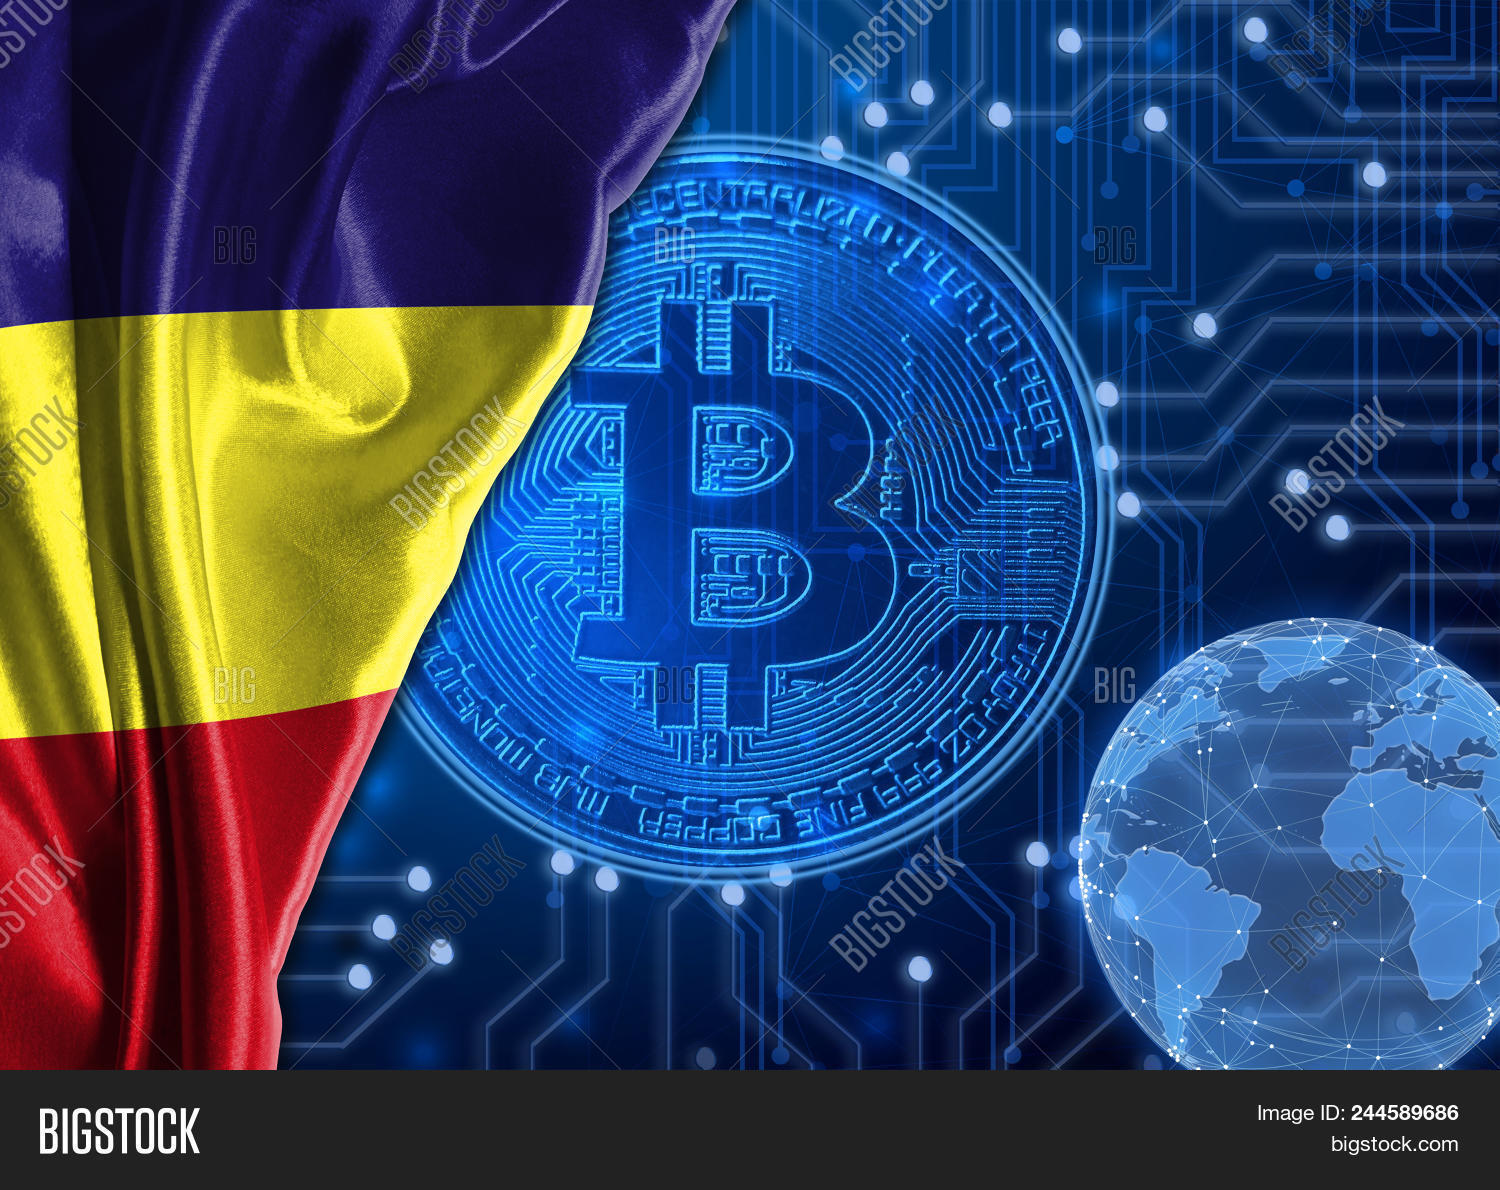 Reuters Pictures - ROMANIA-BITCOIN/